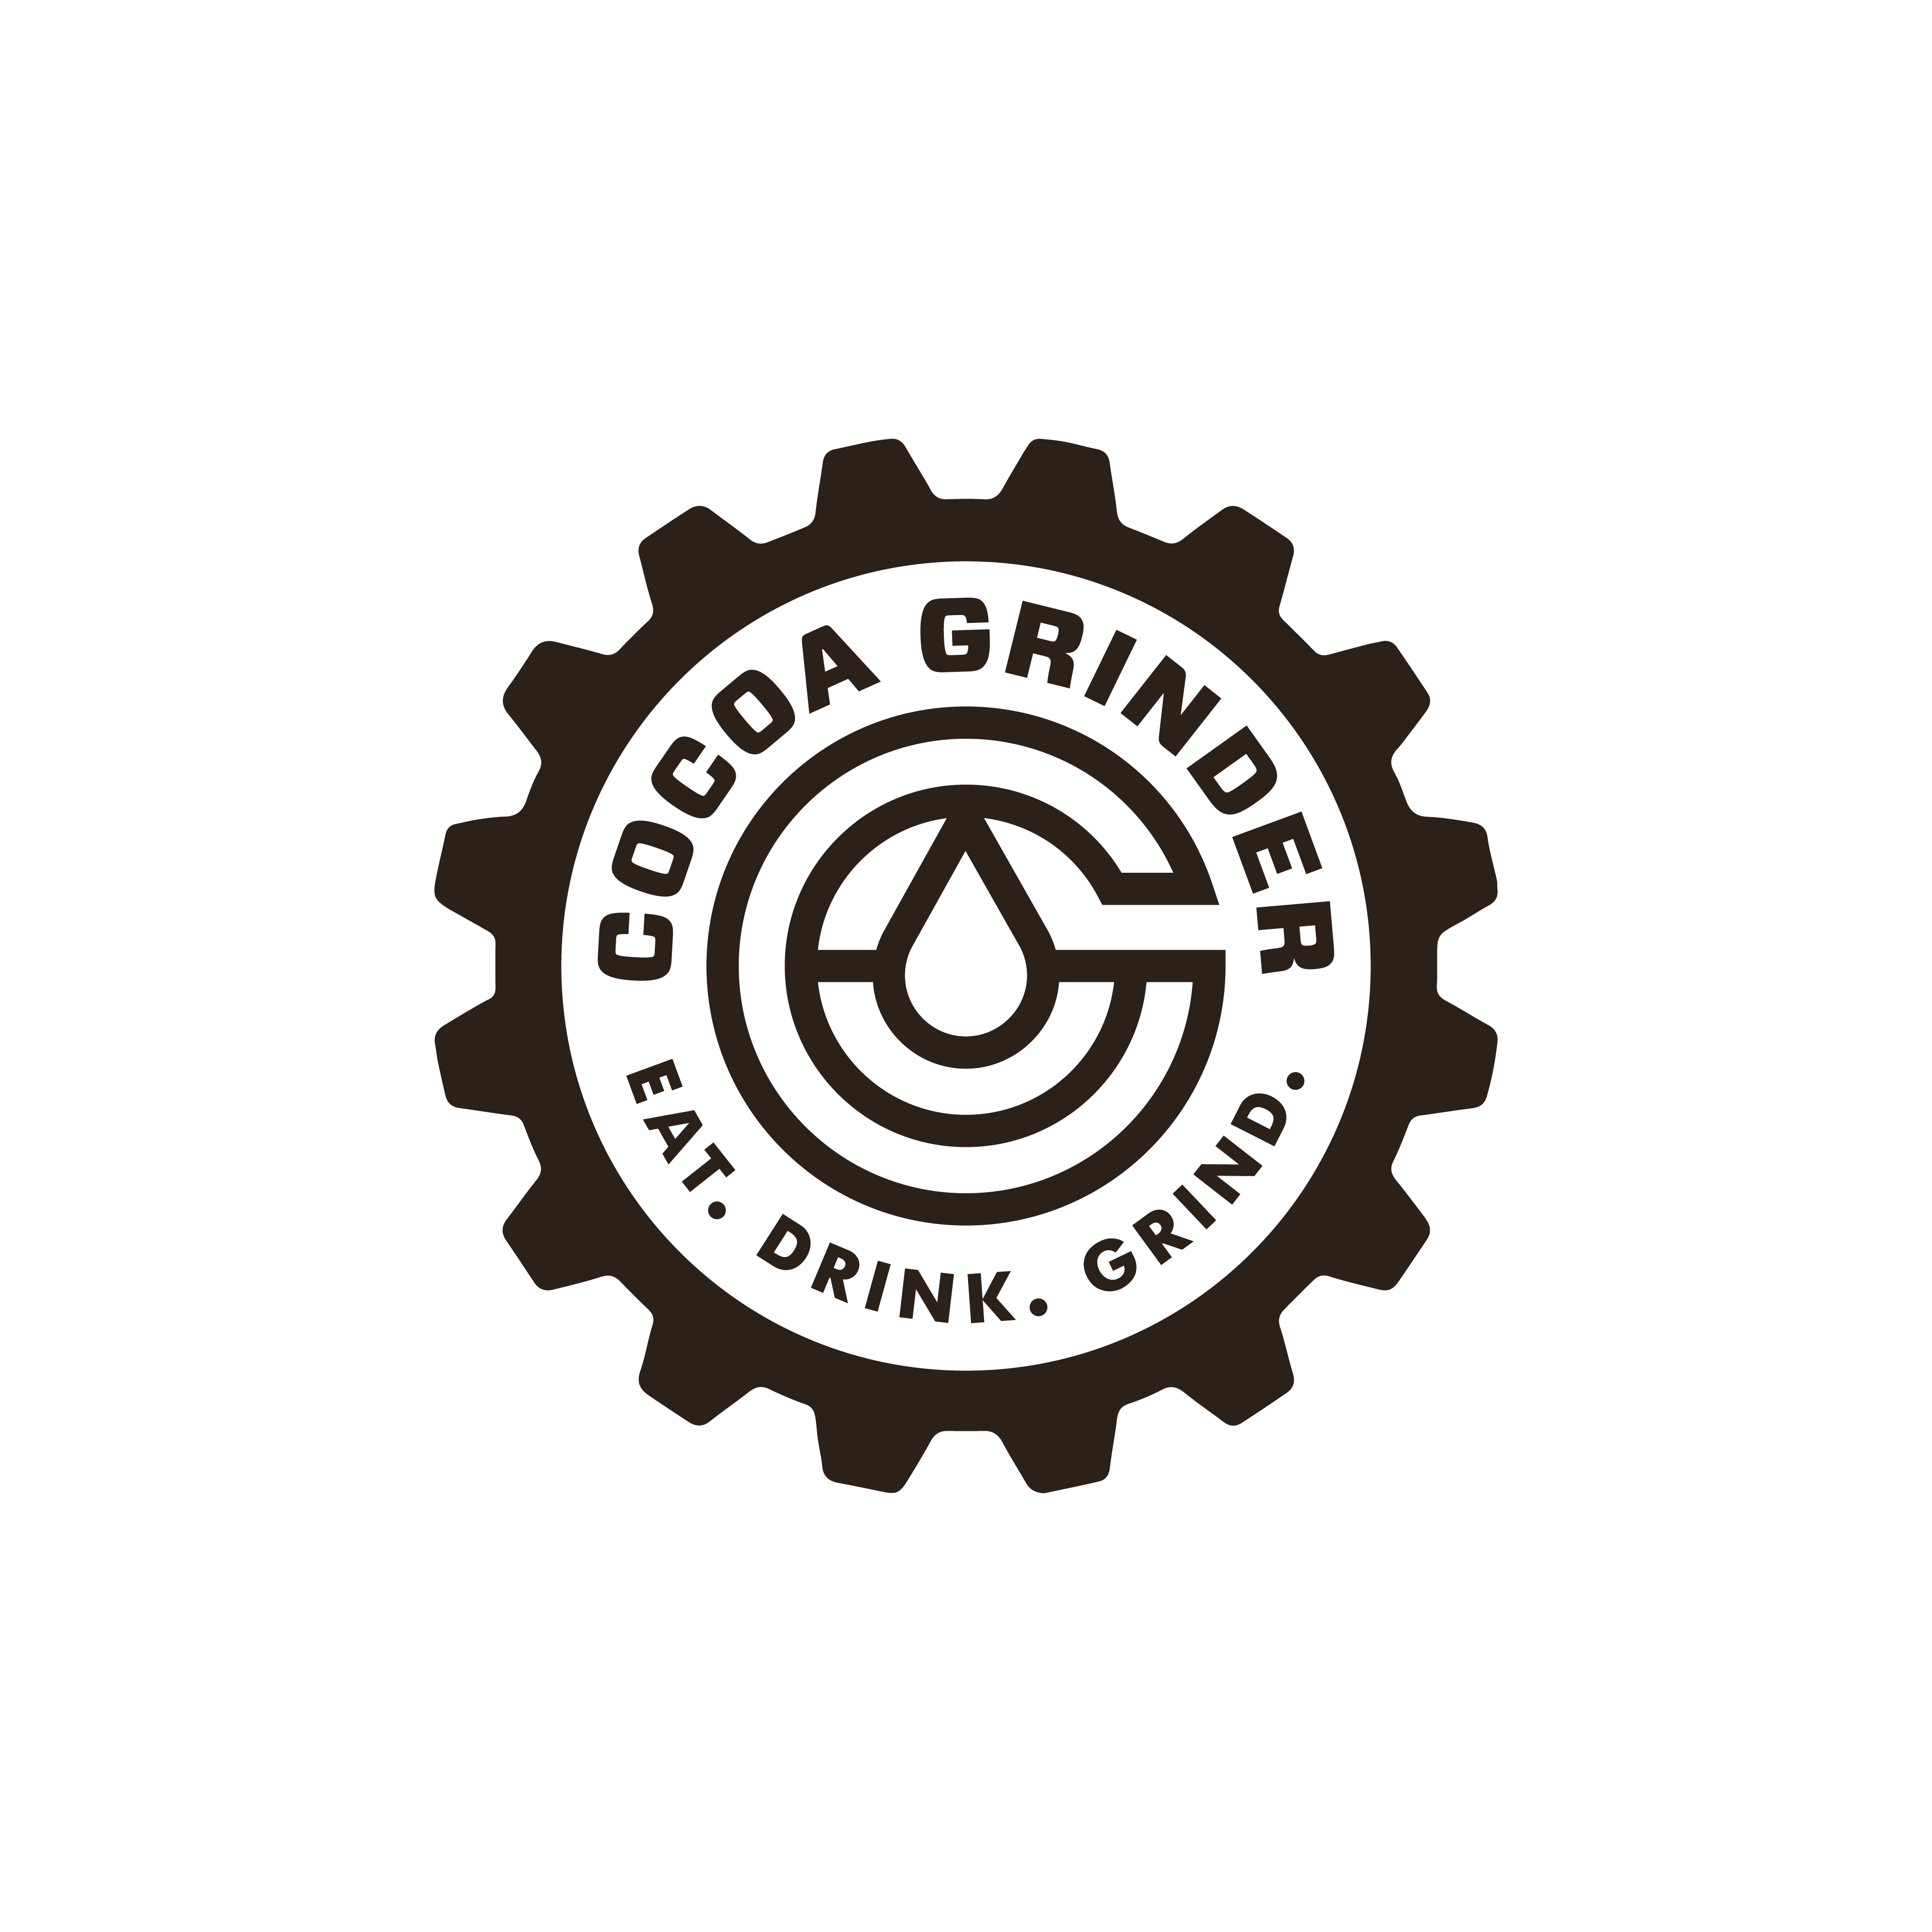 Cocoa Grinder logo design by logo designer SKDCo. for your inspiration and for the worlds largest logo competition